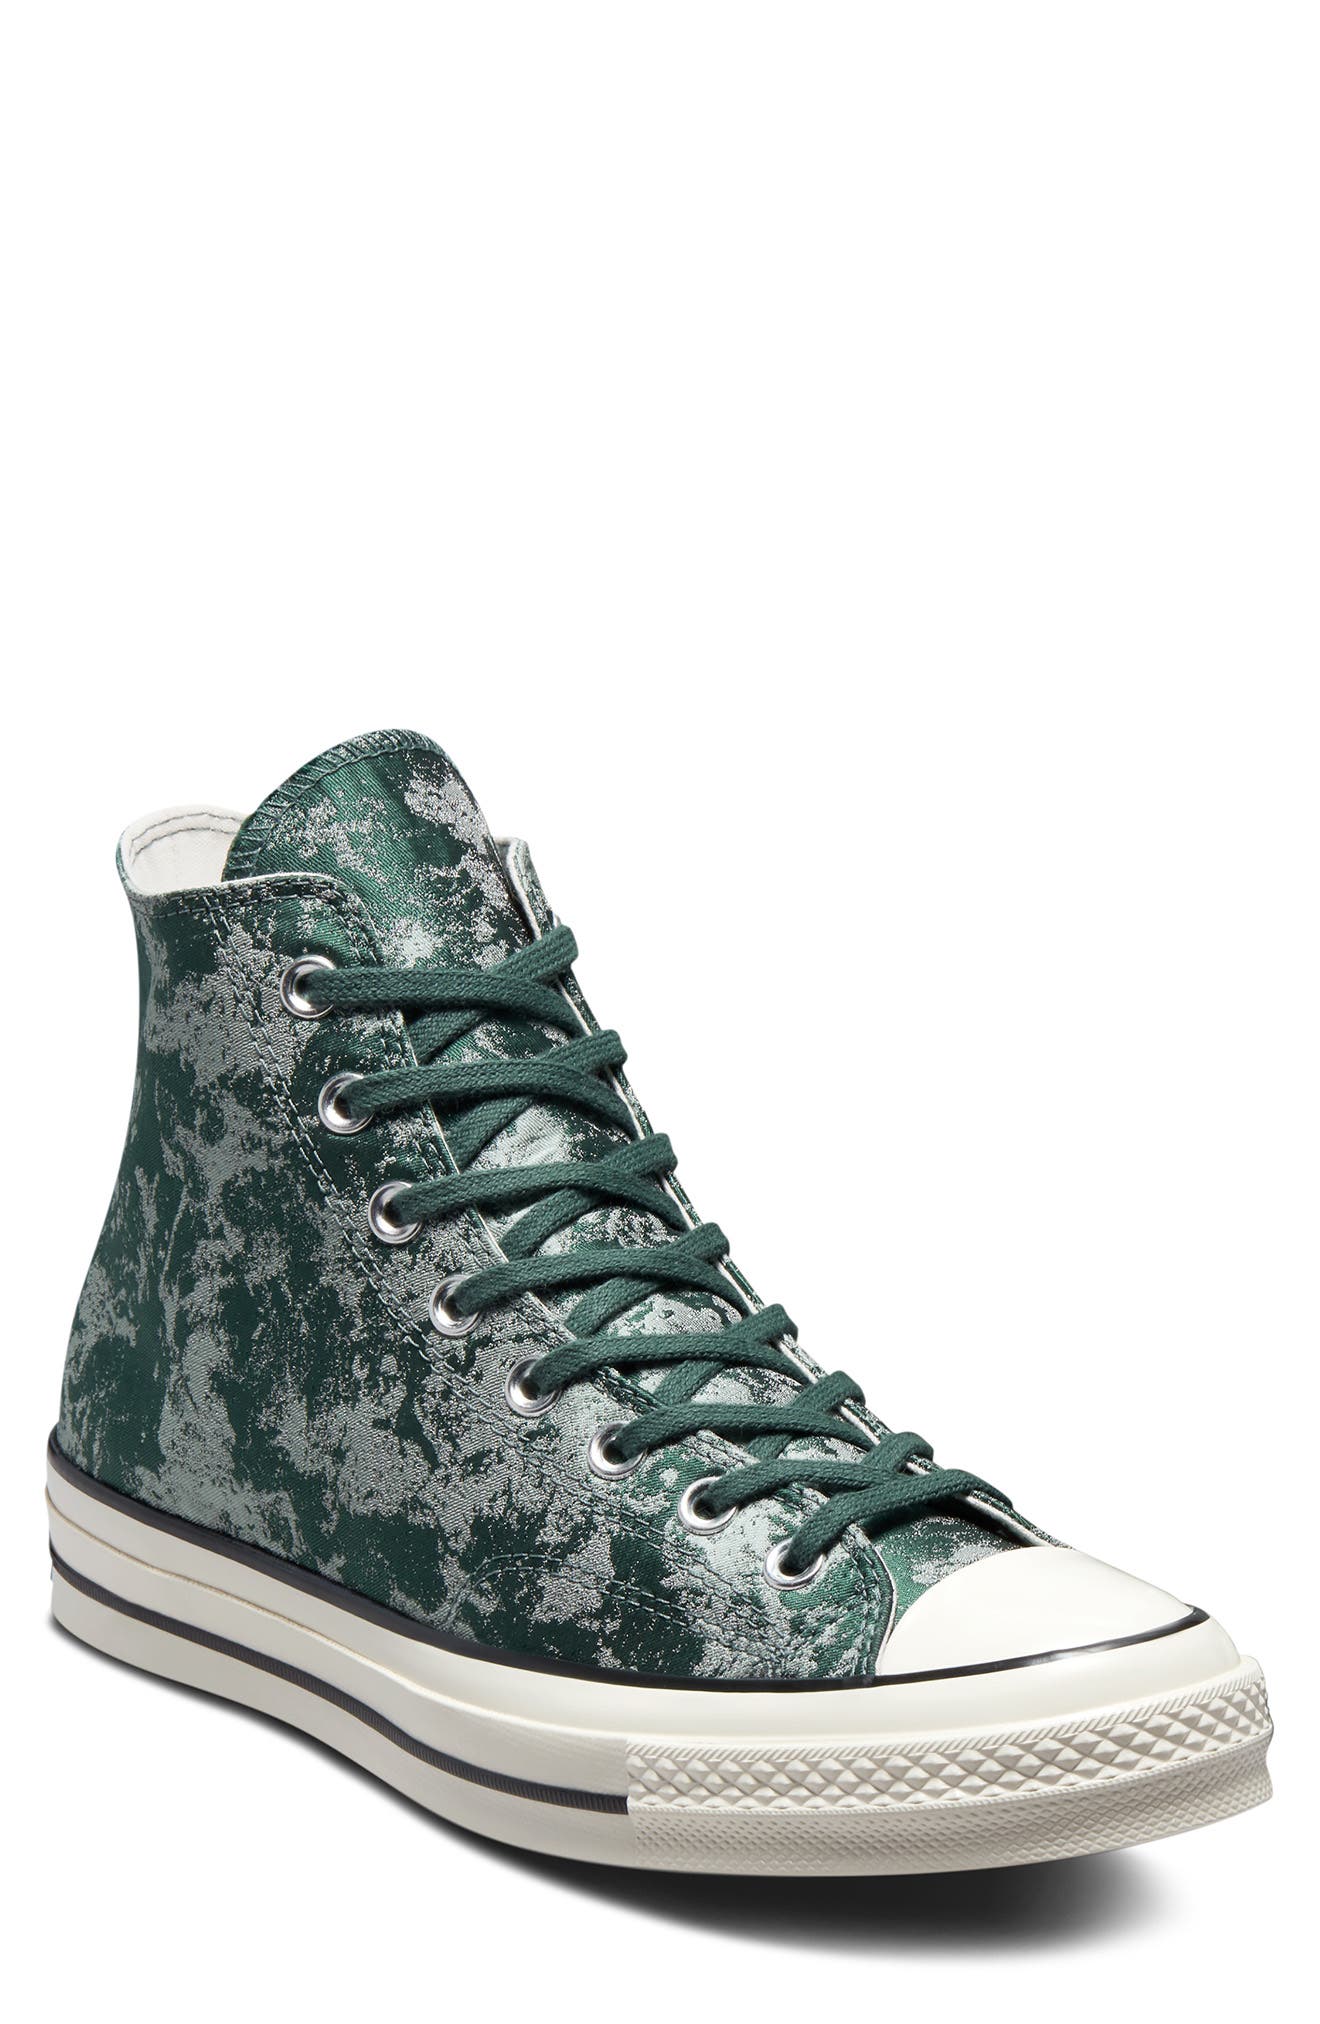 converse all star '70s high top sneakers